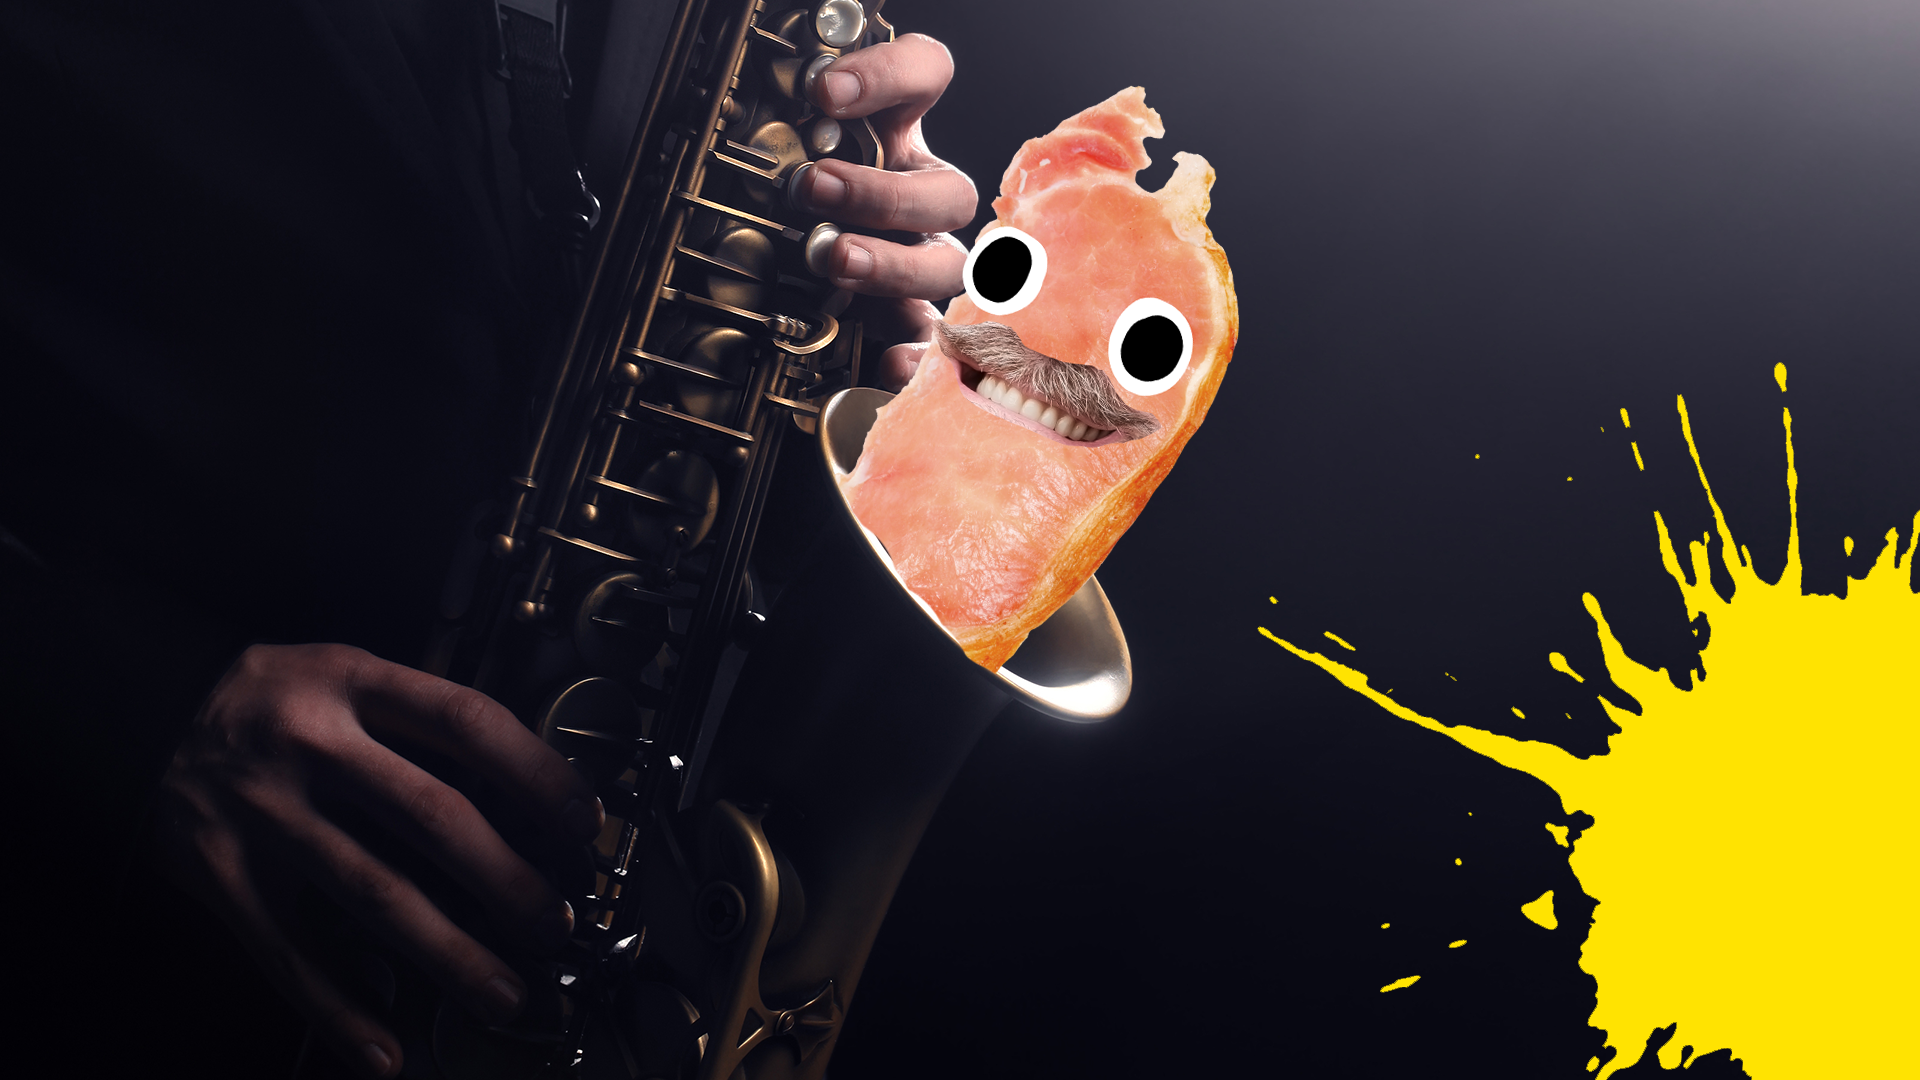 A slice of bacon sticking out of a saxophone